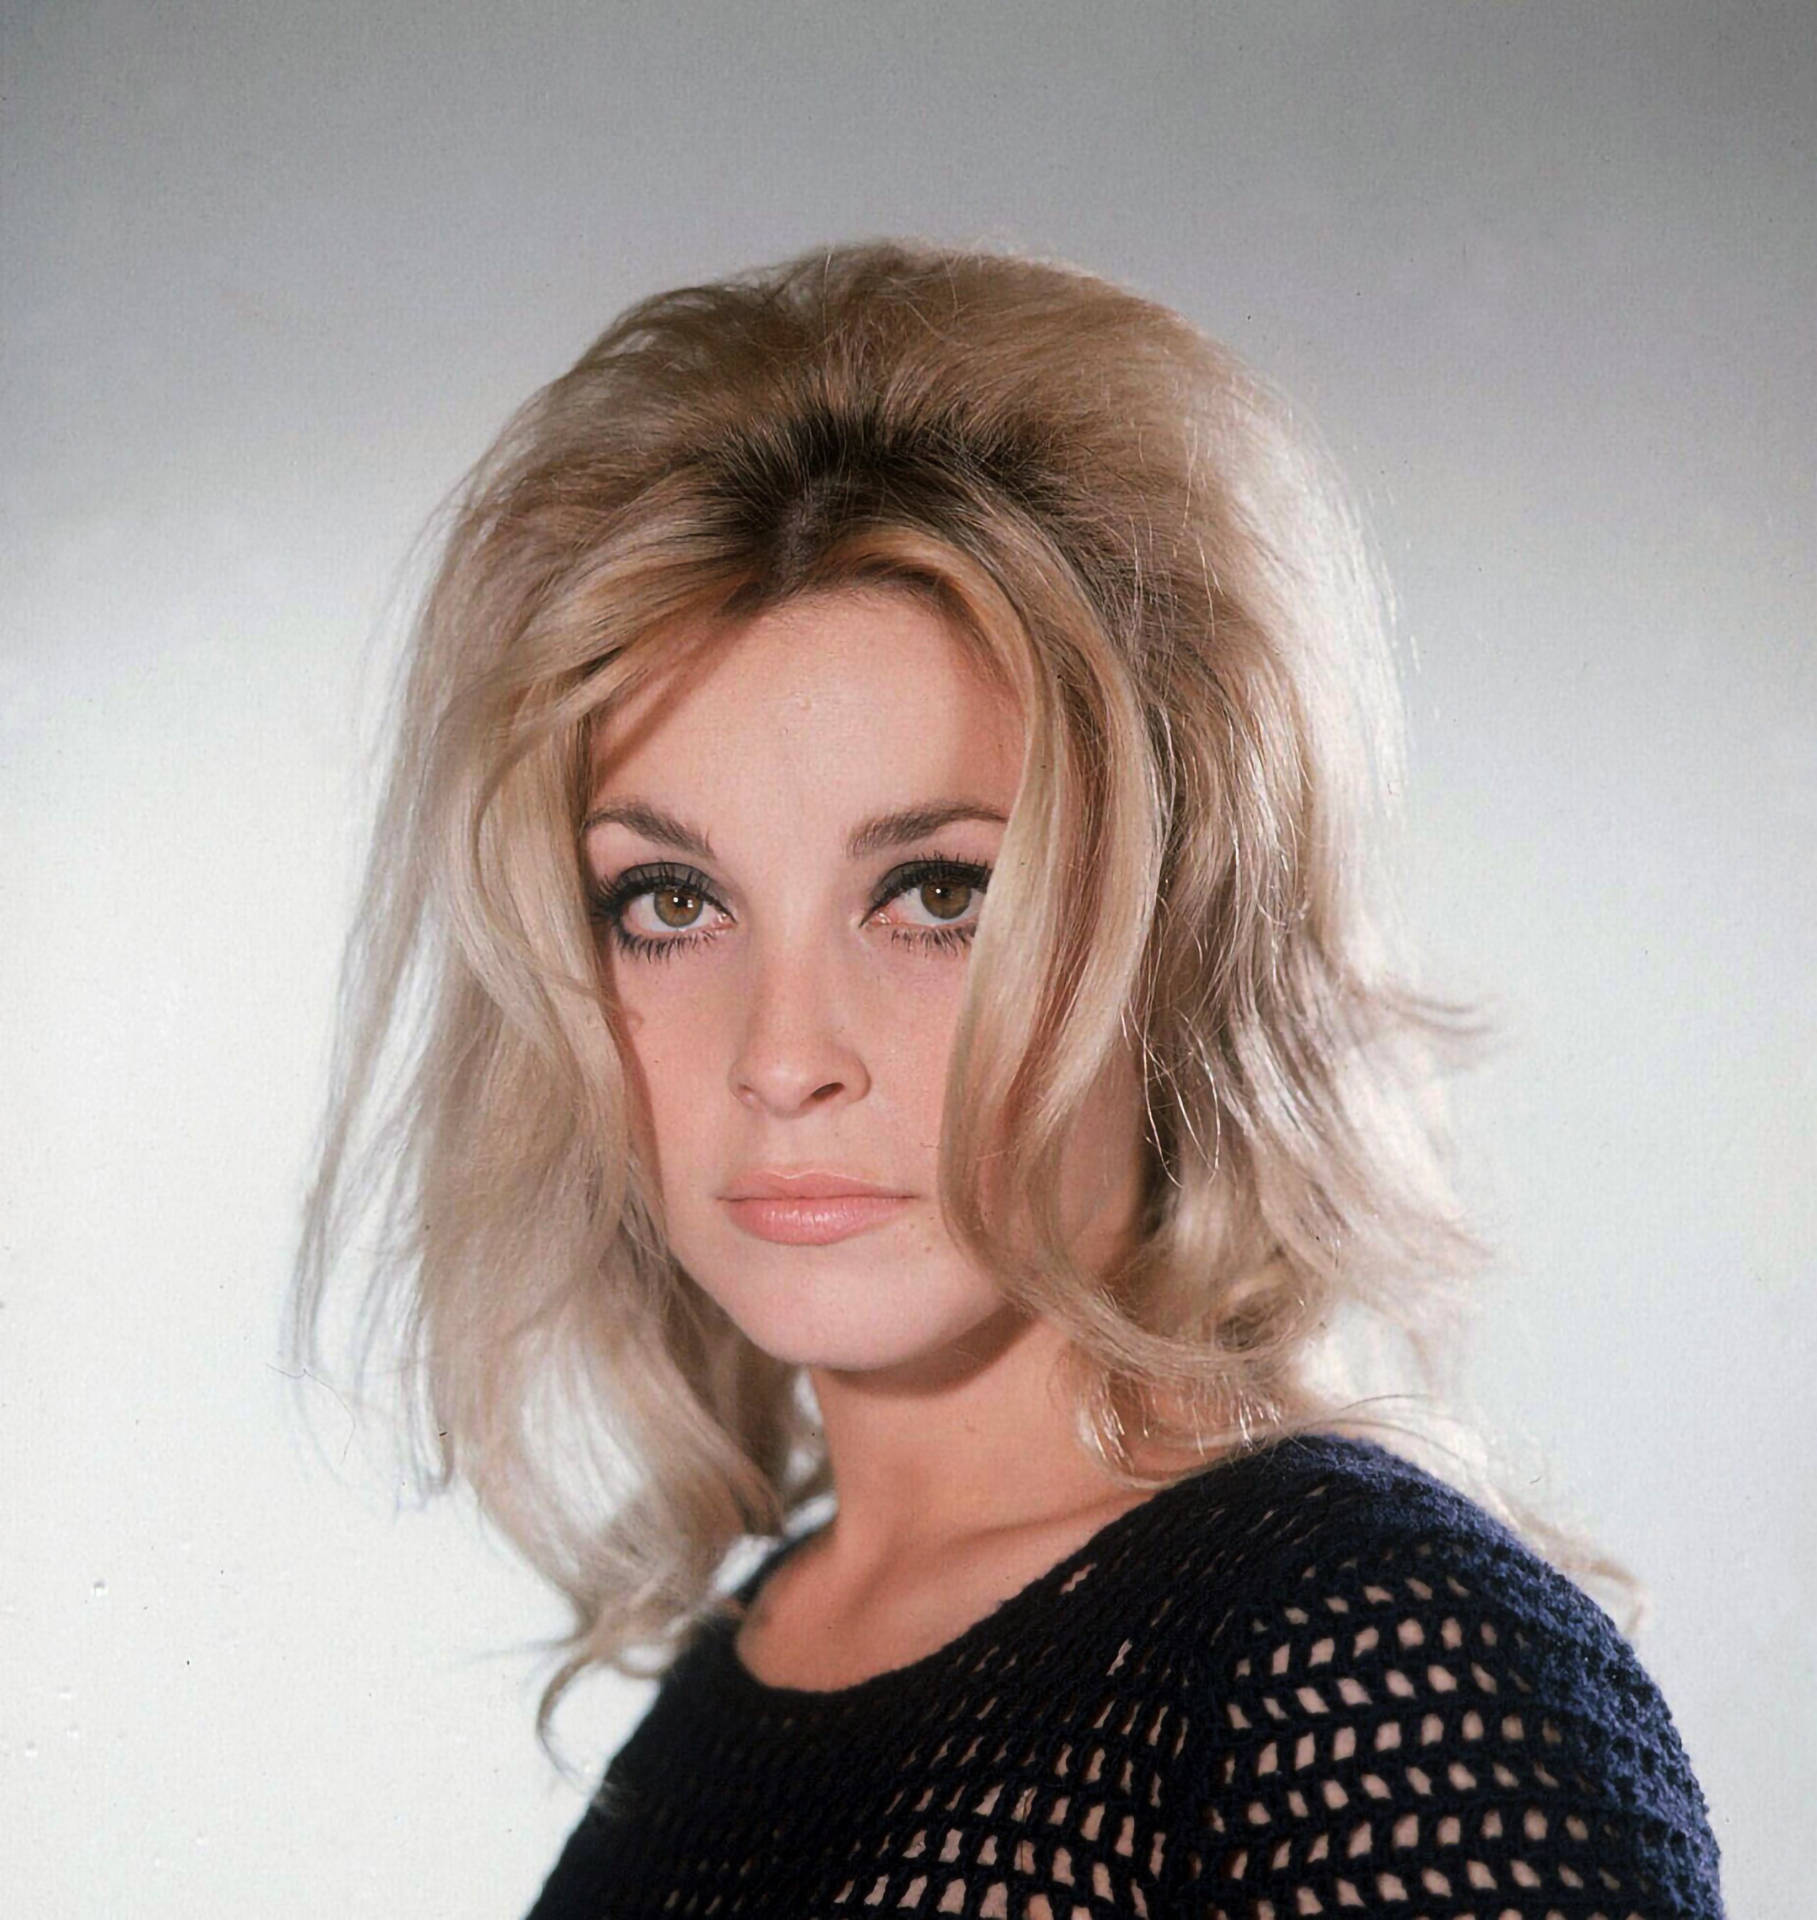 Sharon Tate Posing With Elusive Messy Hairstyle